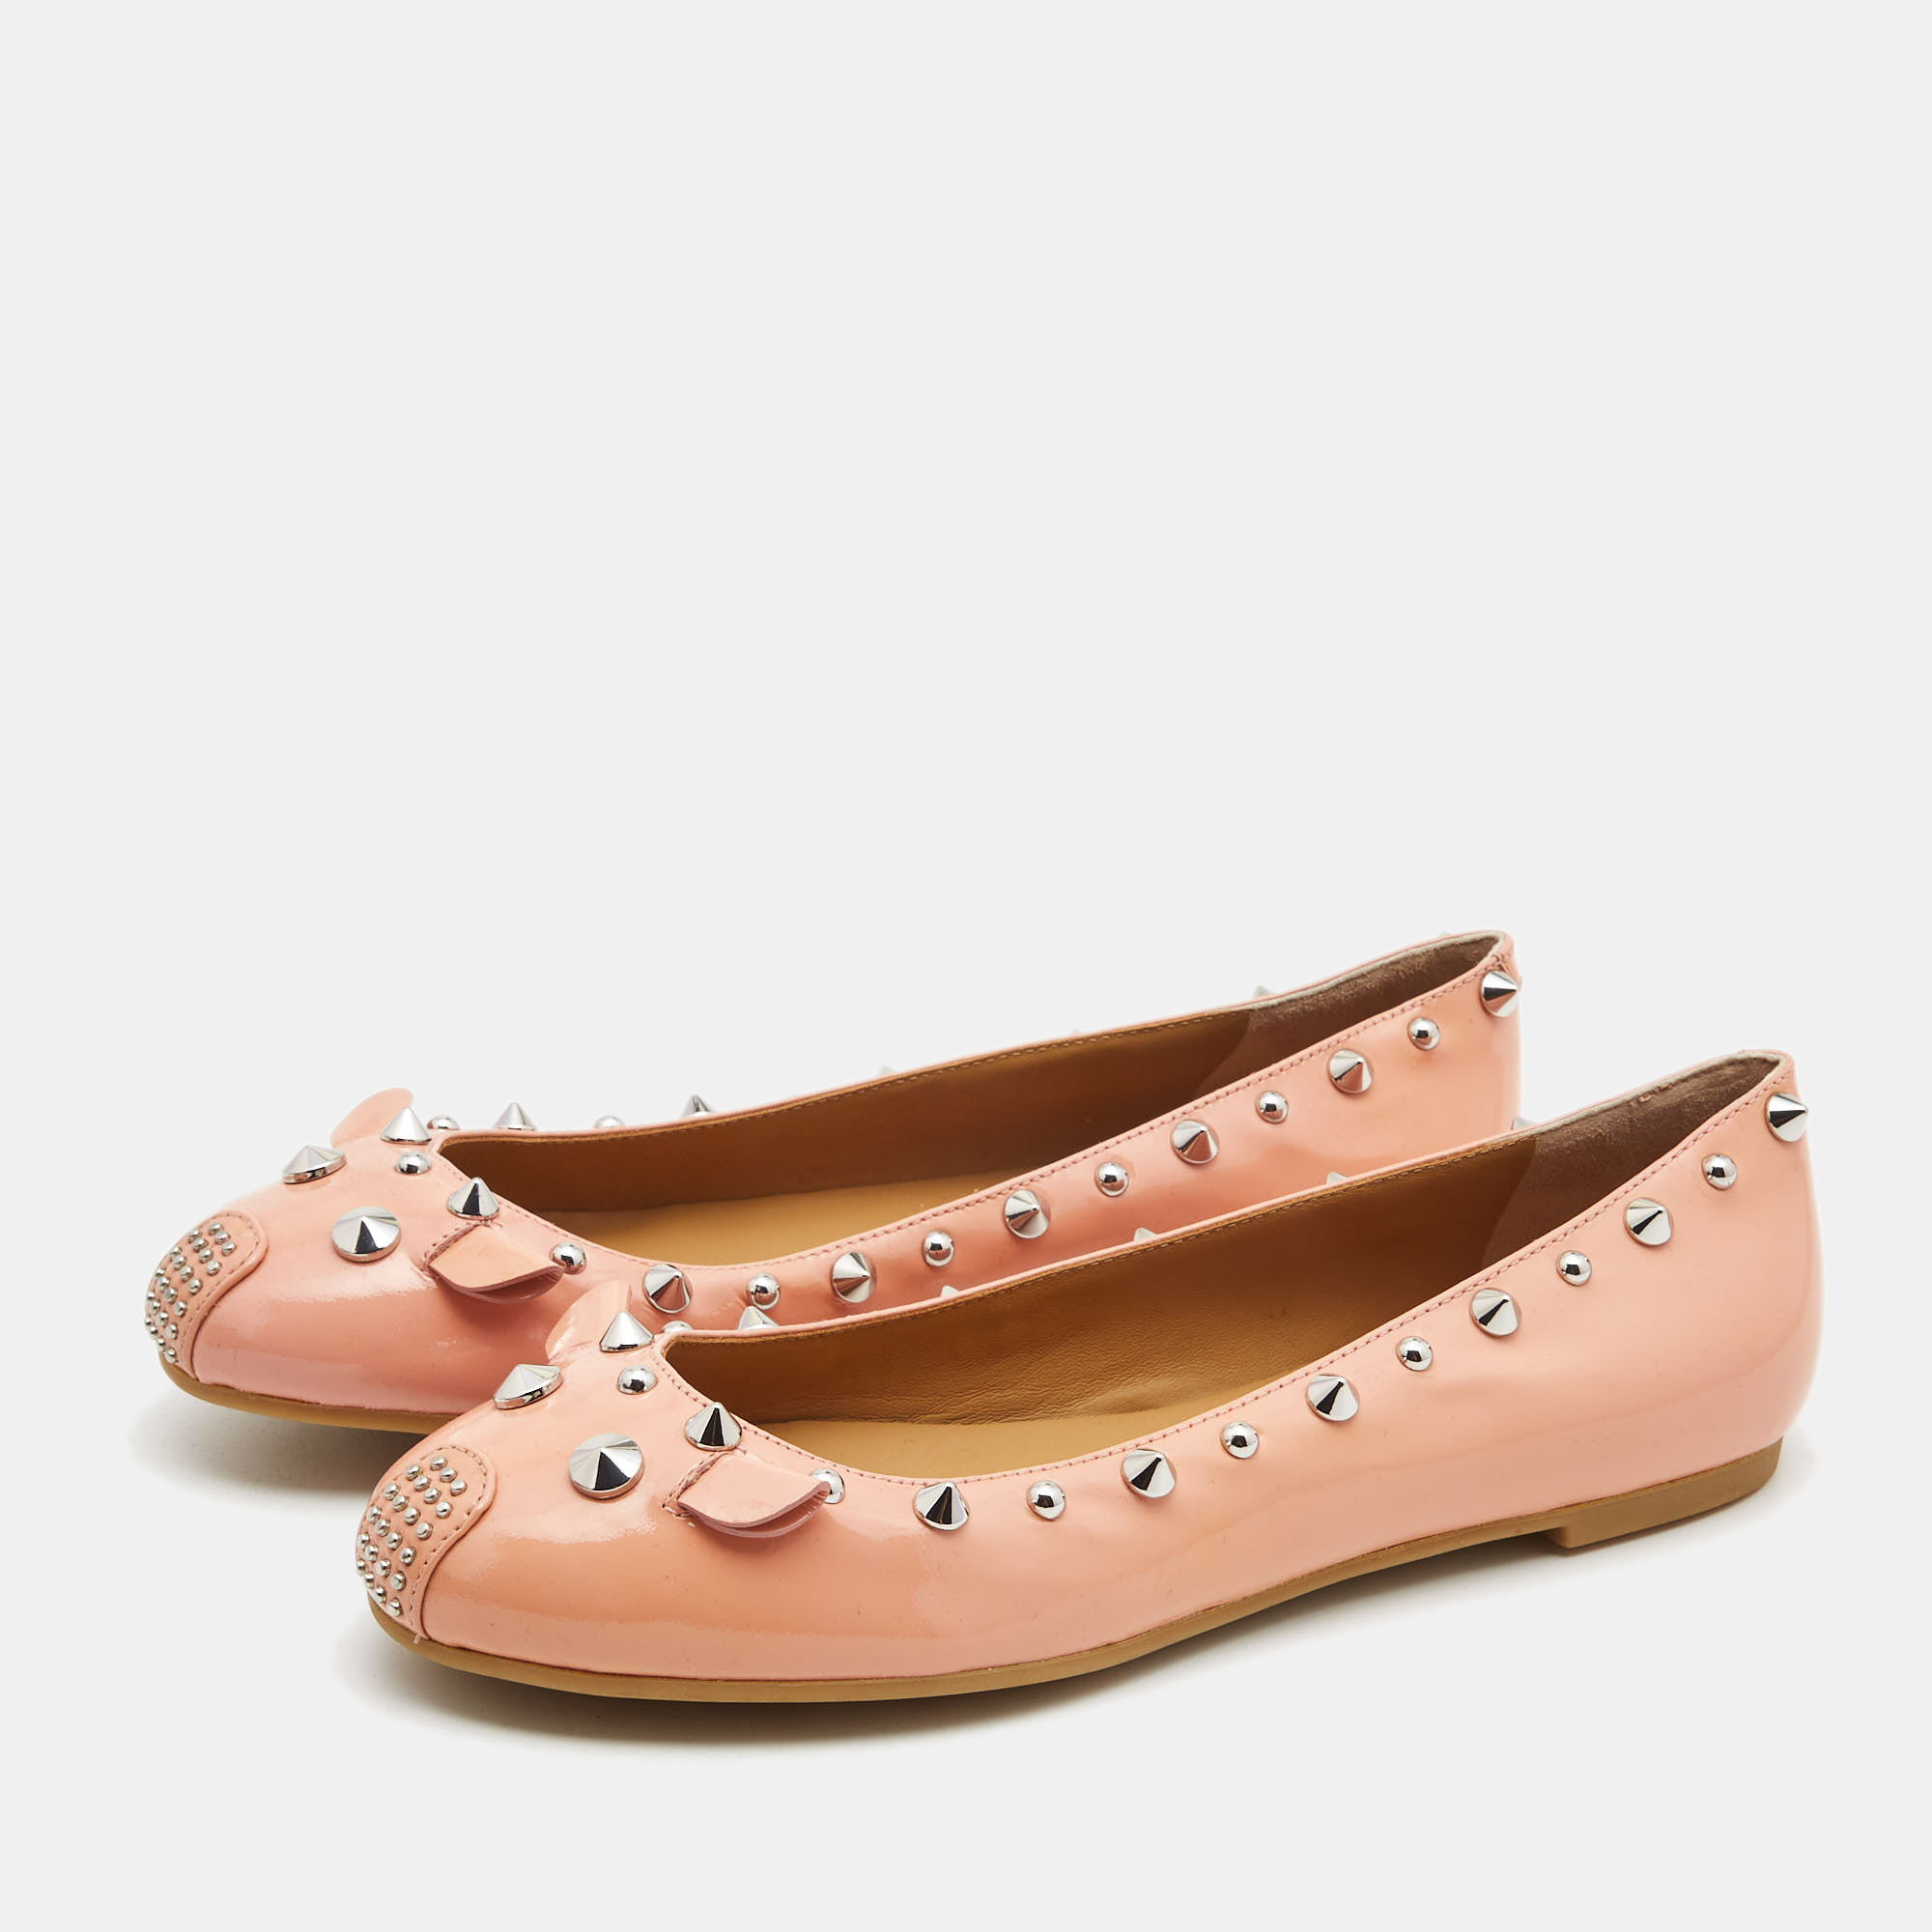 

Marc by Marc Jacobs Beige Patent Leather Studded Ballet Flats Size